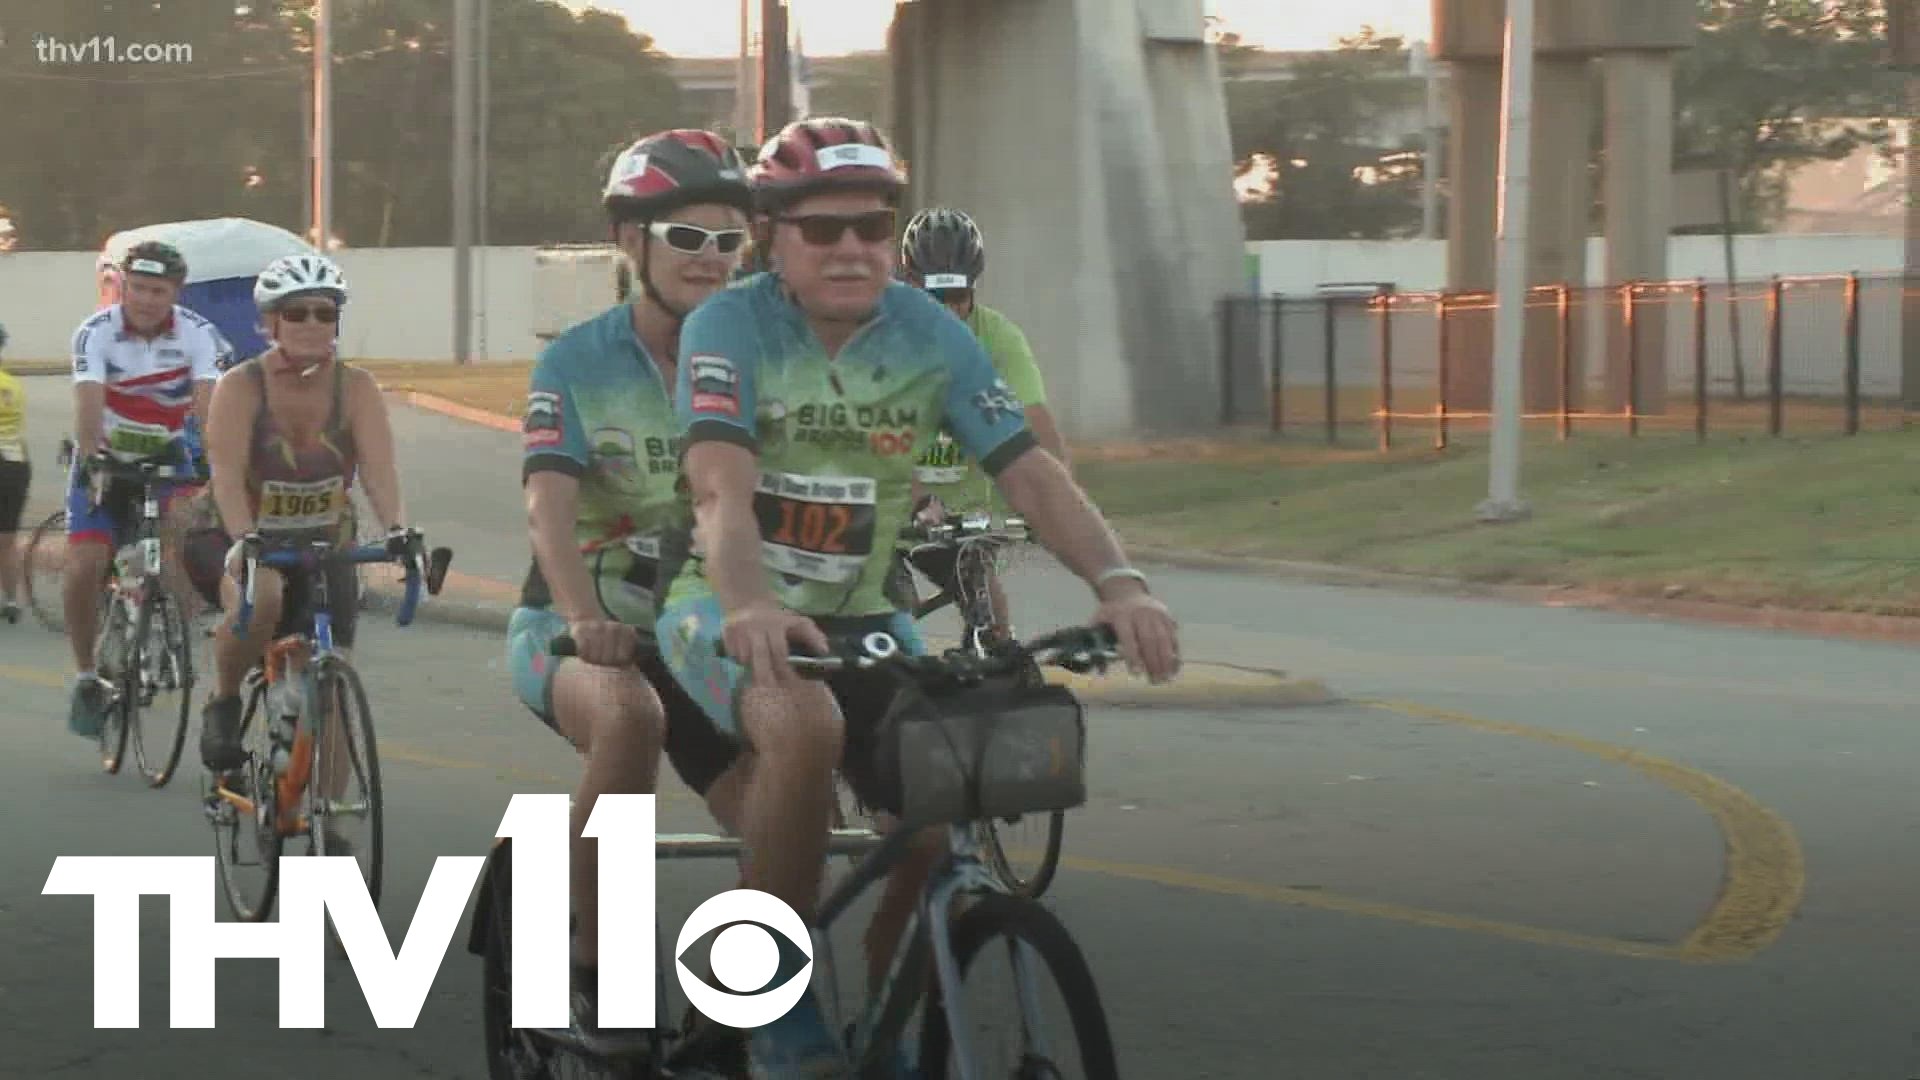 With this year's Big Dam Bridge 100 happening soon, the Pulaski County Sheriff's Office has been working closely with event organizers to ensure cyclists stay safe.